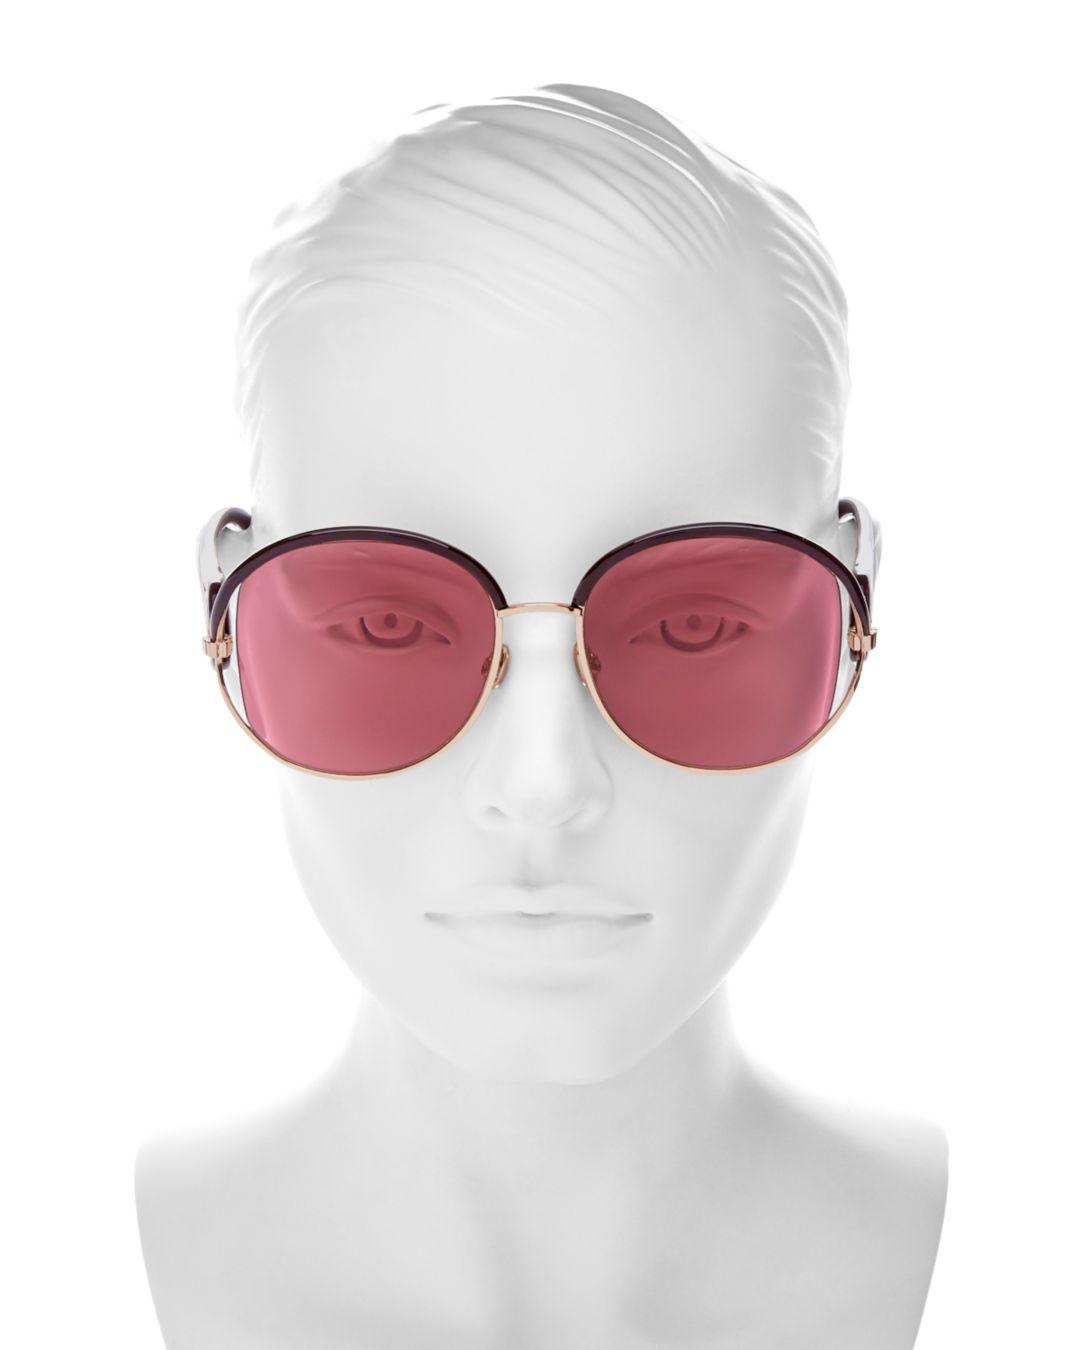 Dior Women's New Volute Round Sunglasses in Gold Violet/Pink (Pink 